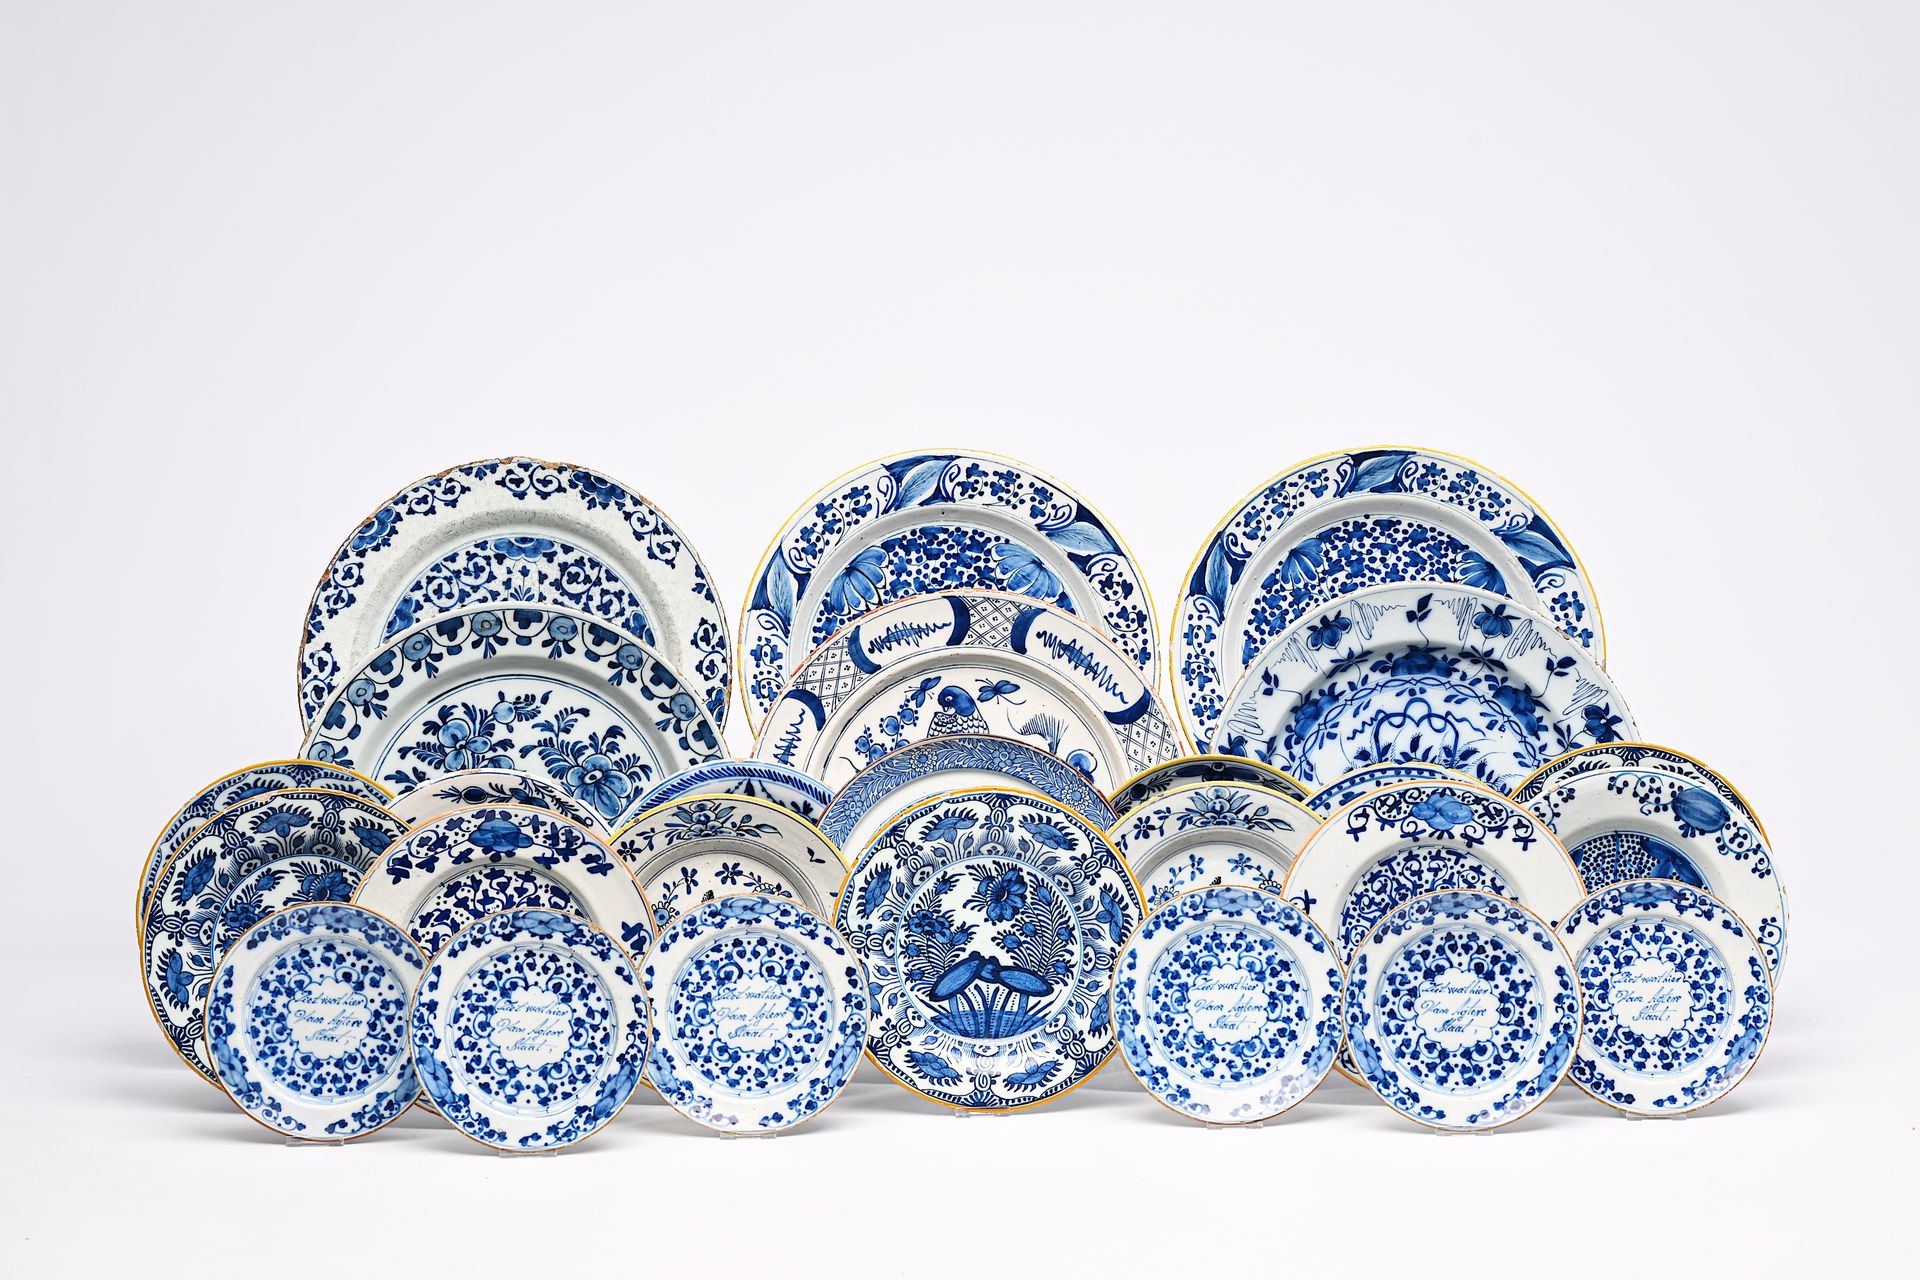 Twenty-six Dutch Delft blue and white dishes and plates, 18th C. Sechsundzwanzig&hellip;